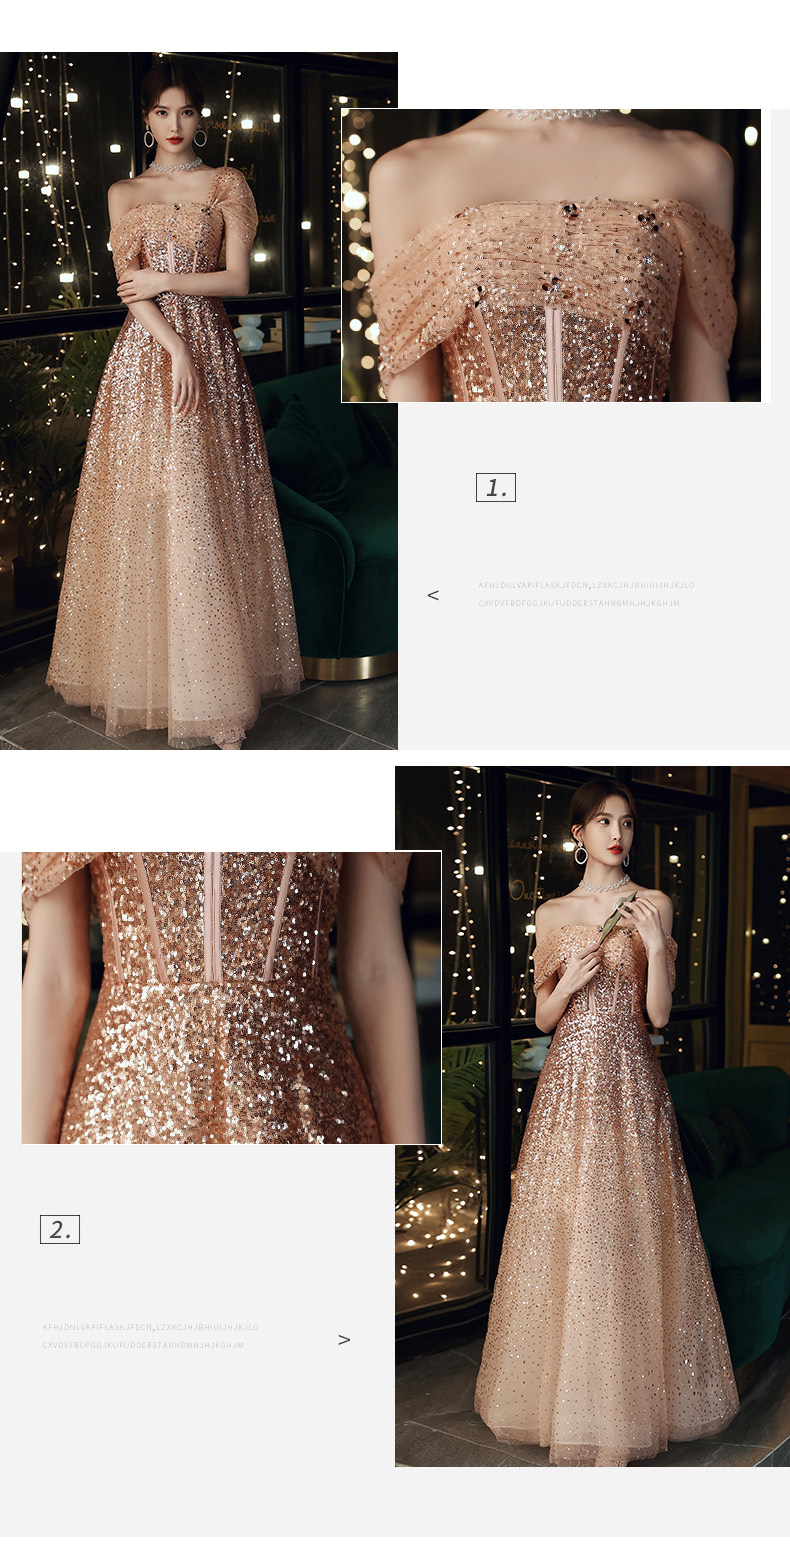 Fashion-Champagne-Tube-Evening-Dress-Formal-Prom-Long-Gown08.jpg